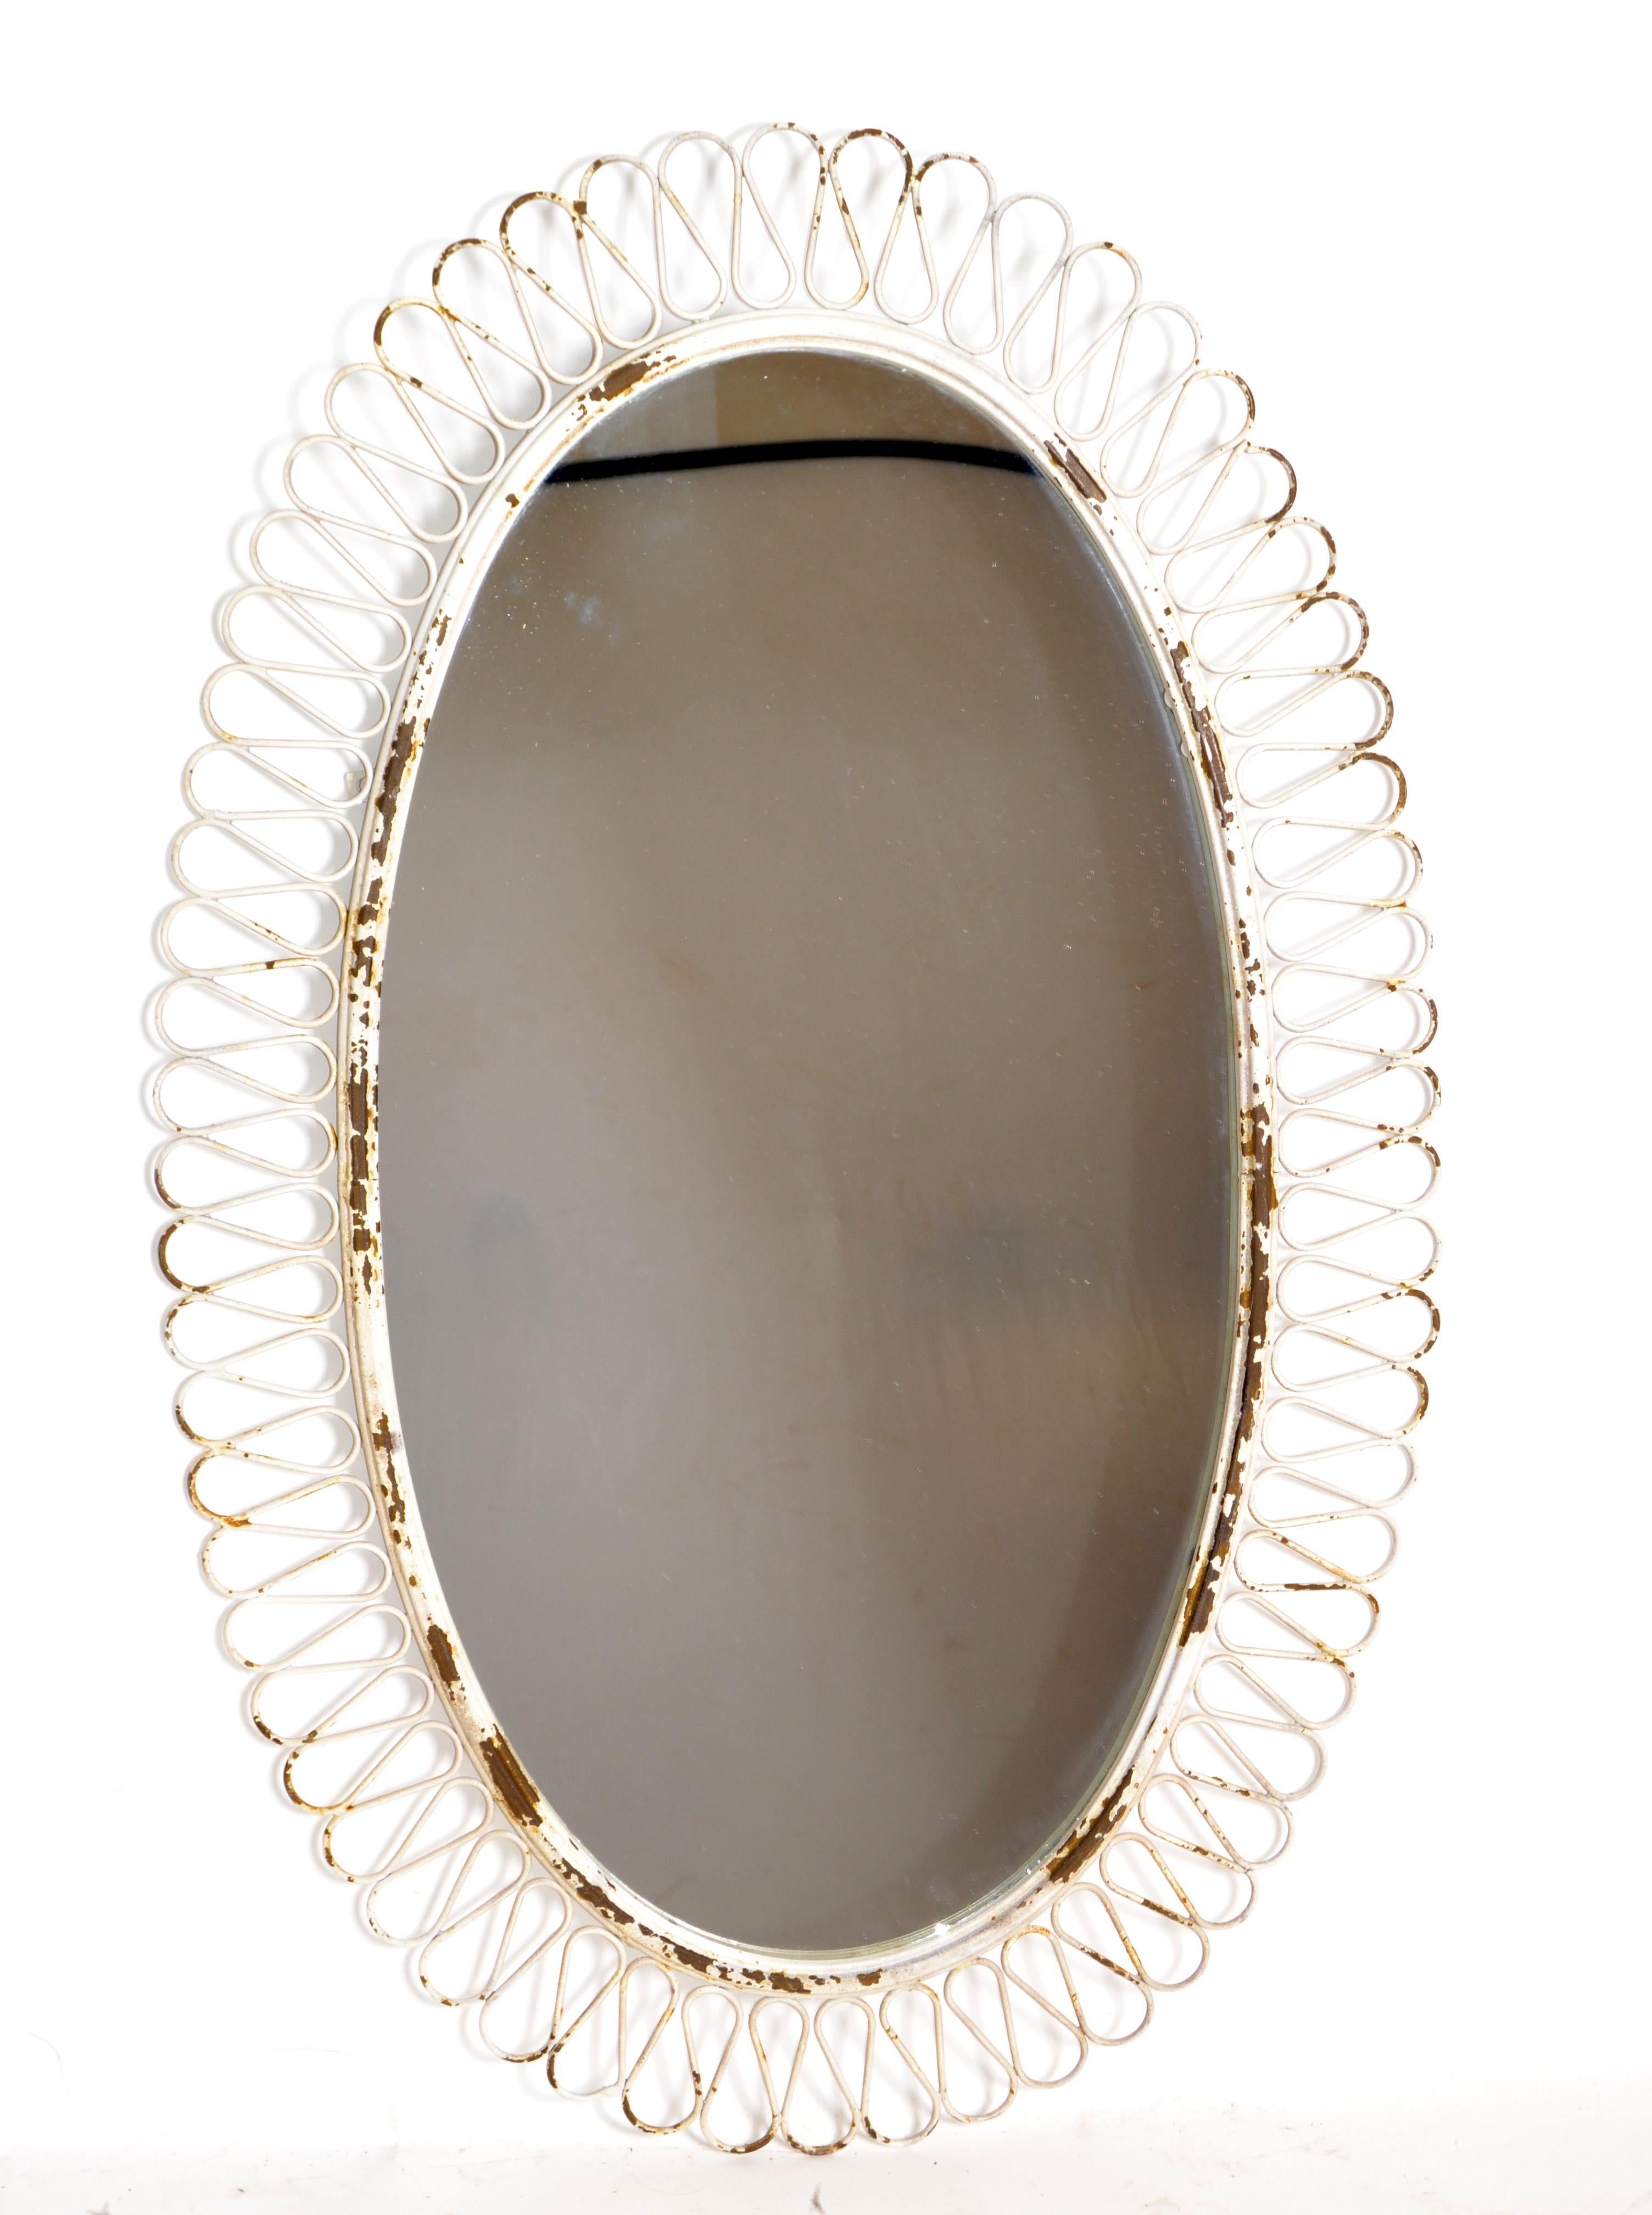 Mid-20th Century Pair of French Oval Wrought Iron Wall Mirror Antique White distressed Look, 1950